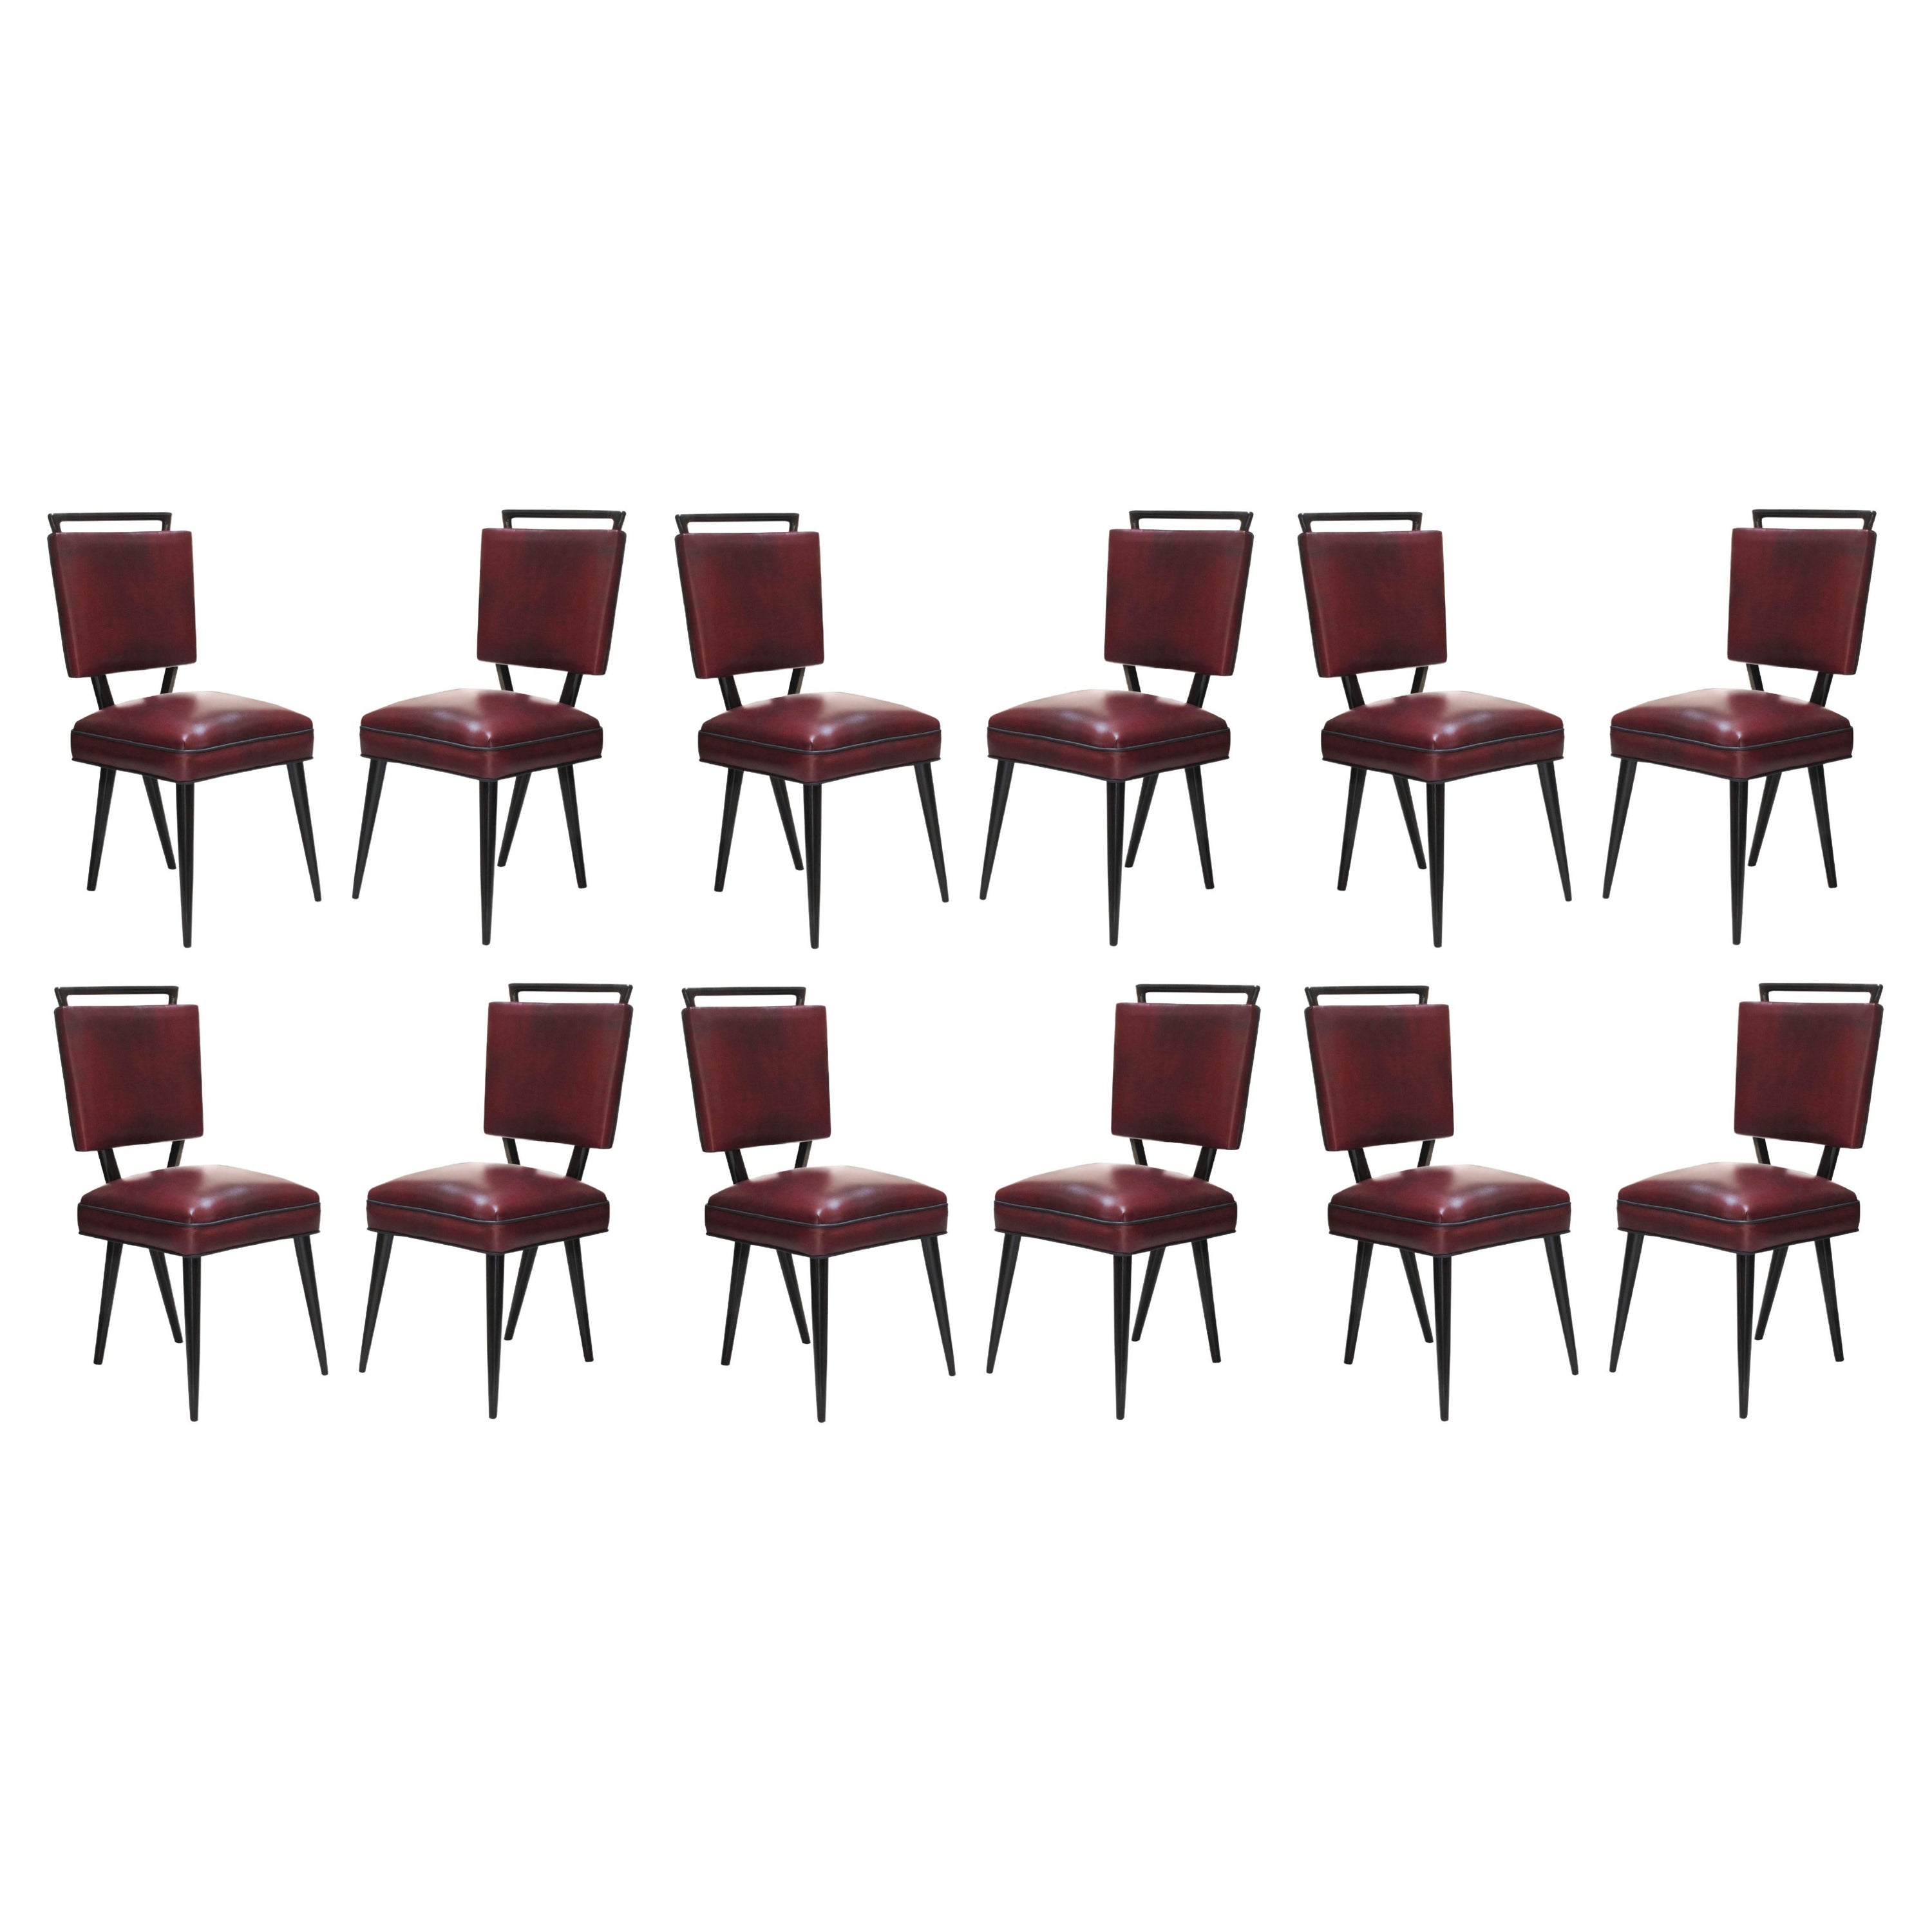 Set of 12 Chairs 50° in Leather and Wood, Italian For Sale